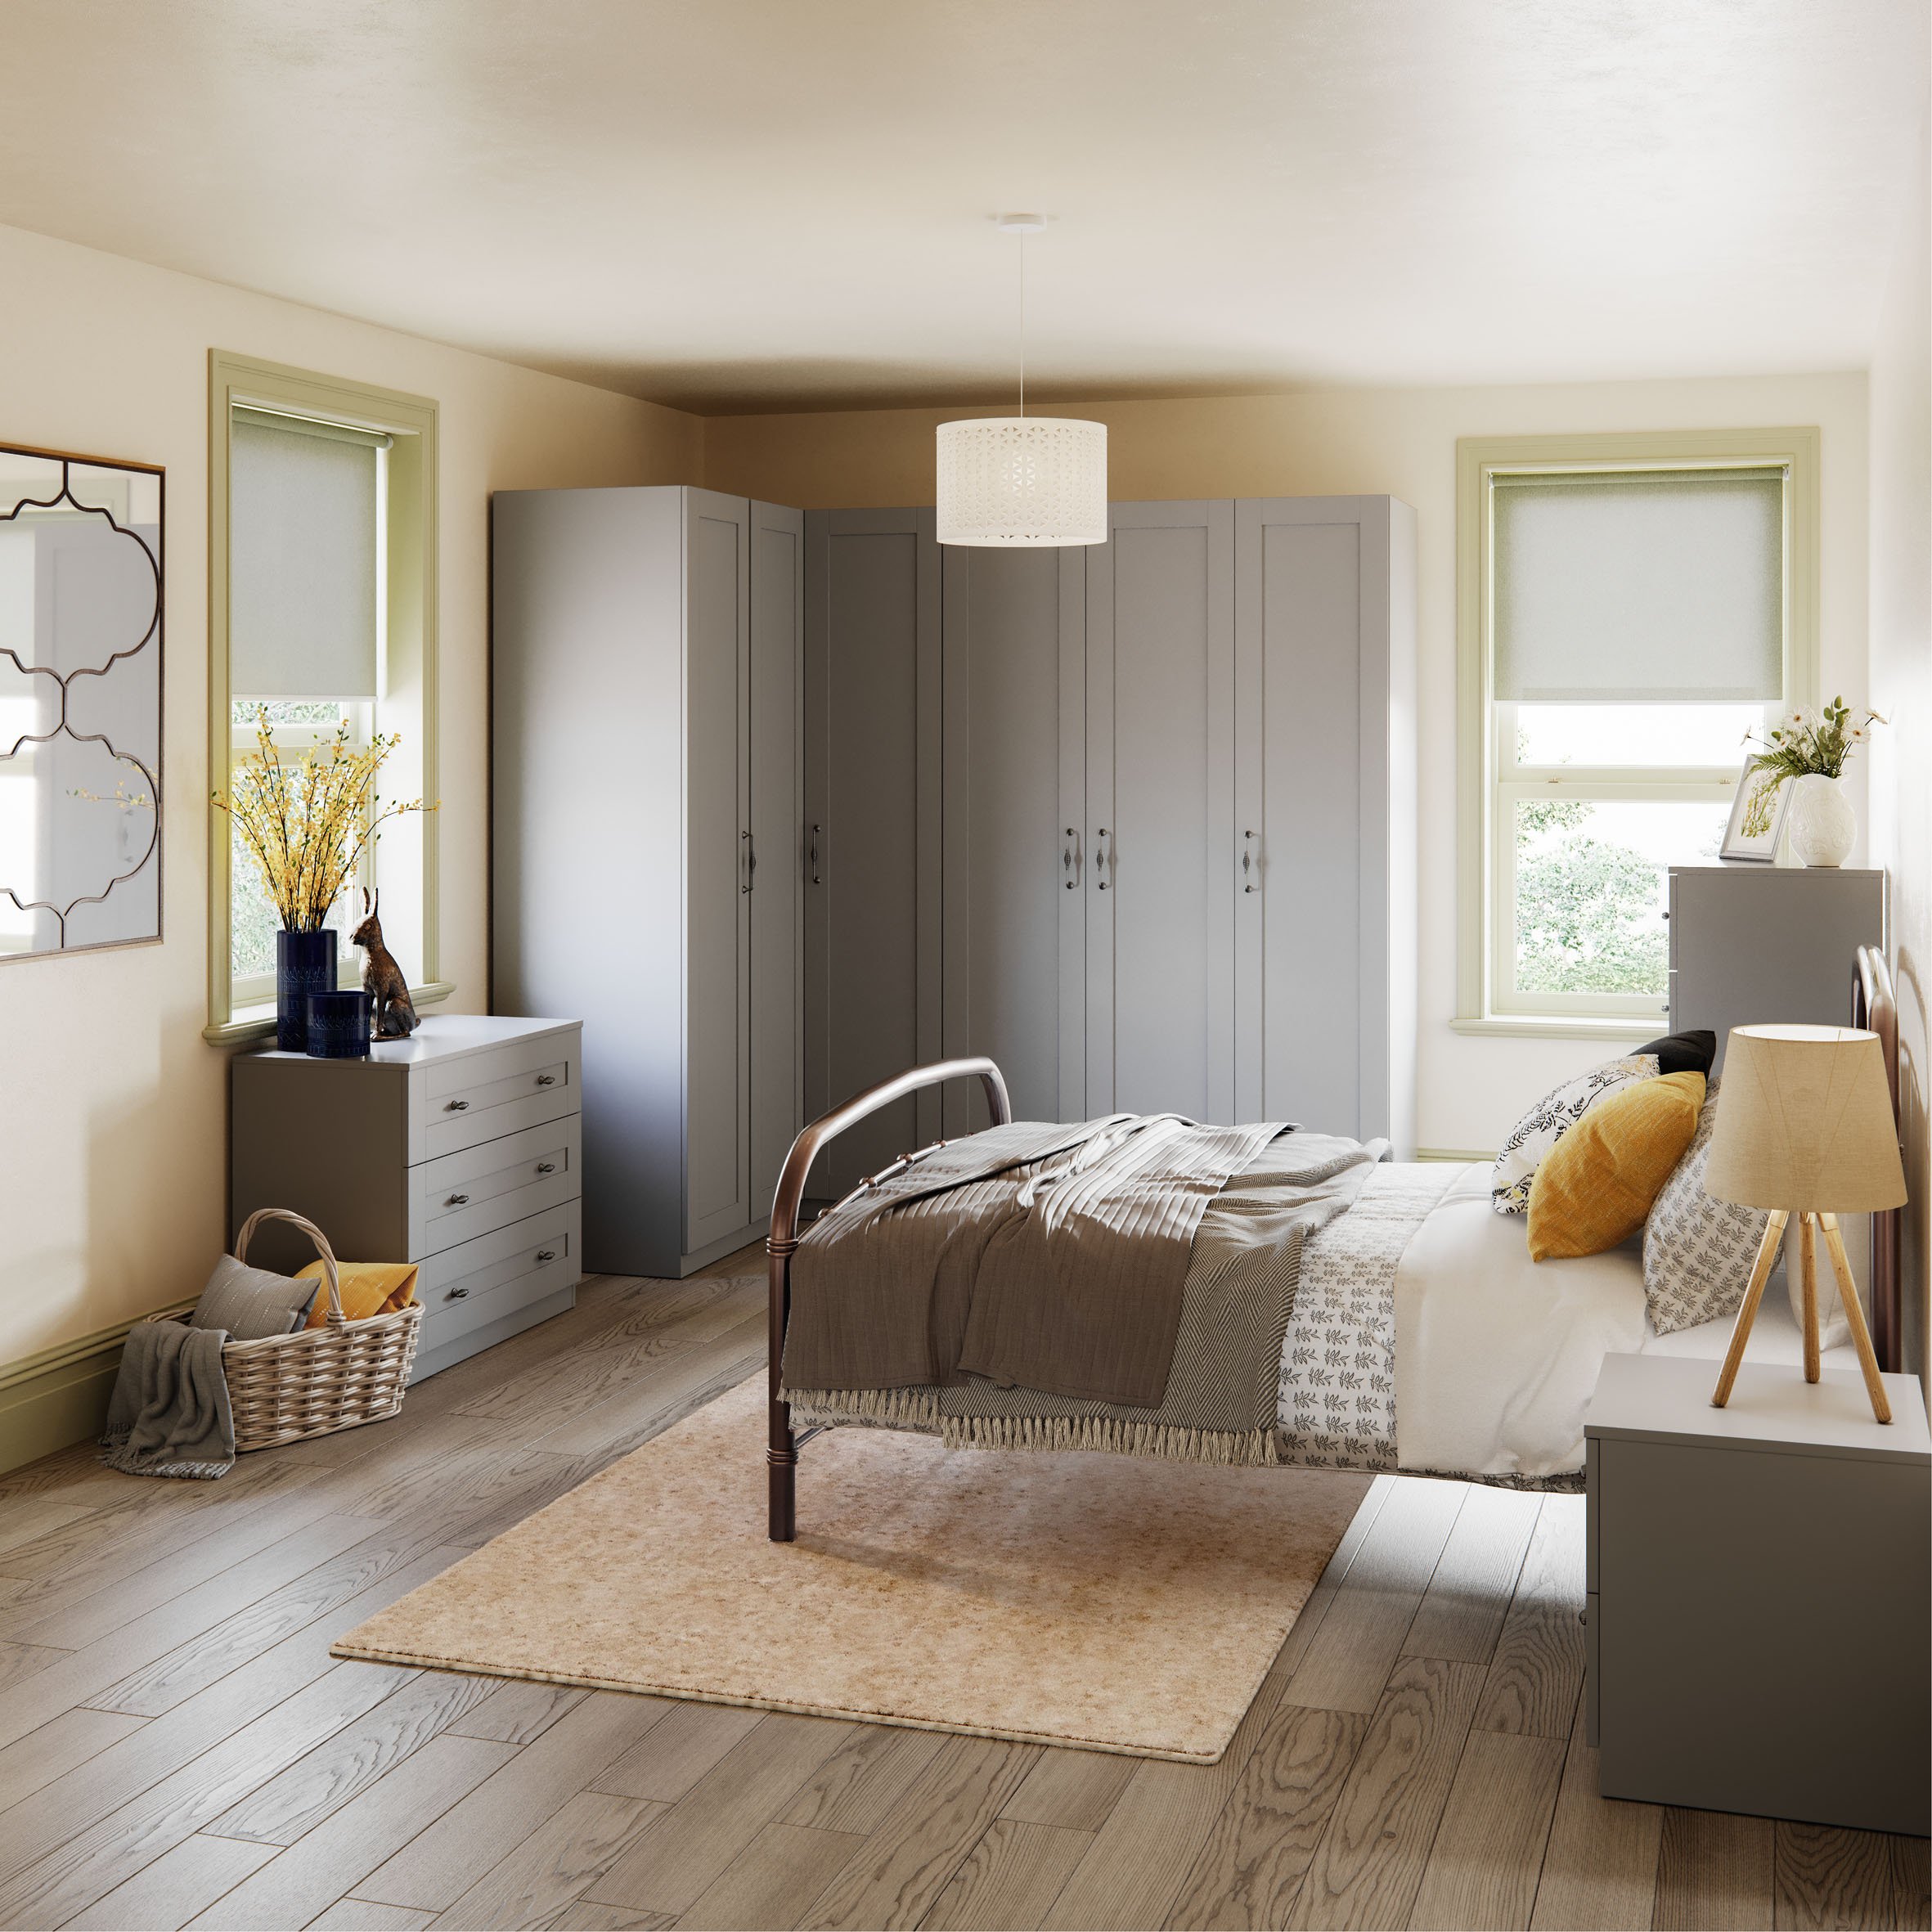 an image of a cream and grey bedroom